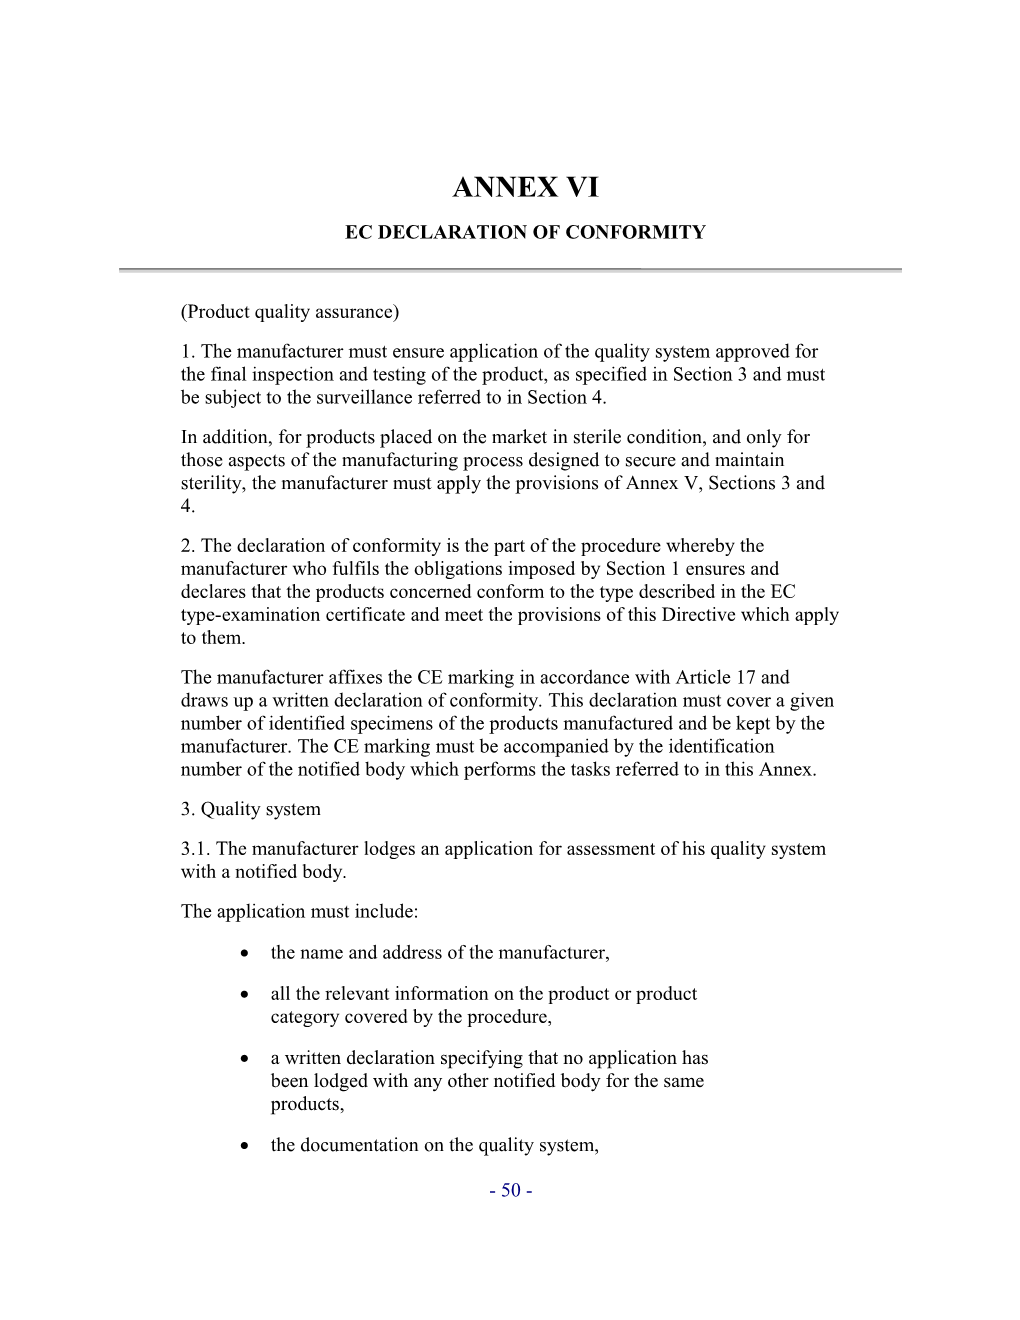 Medical Devices Directive: Annexes 6-12